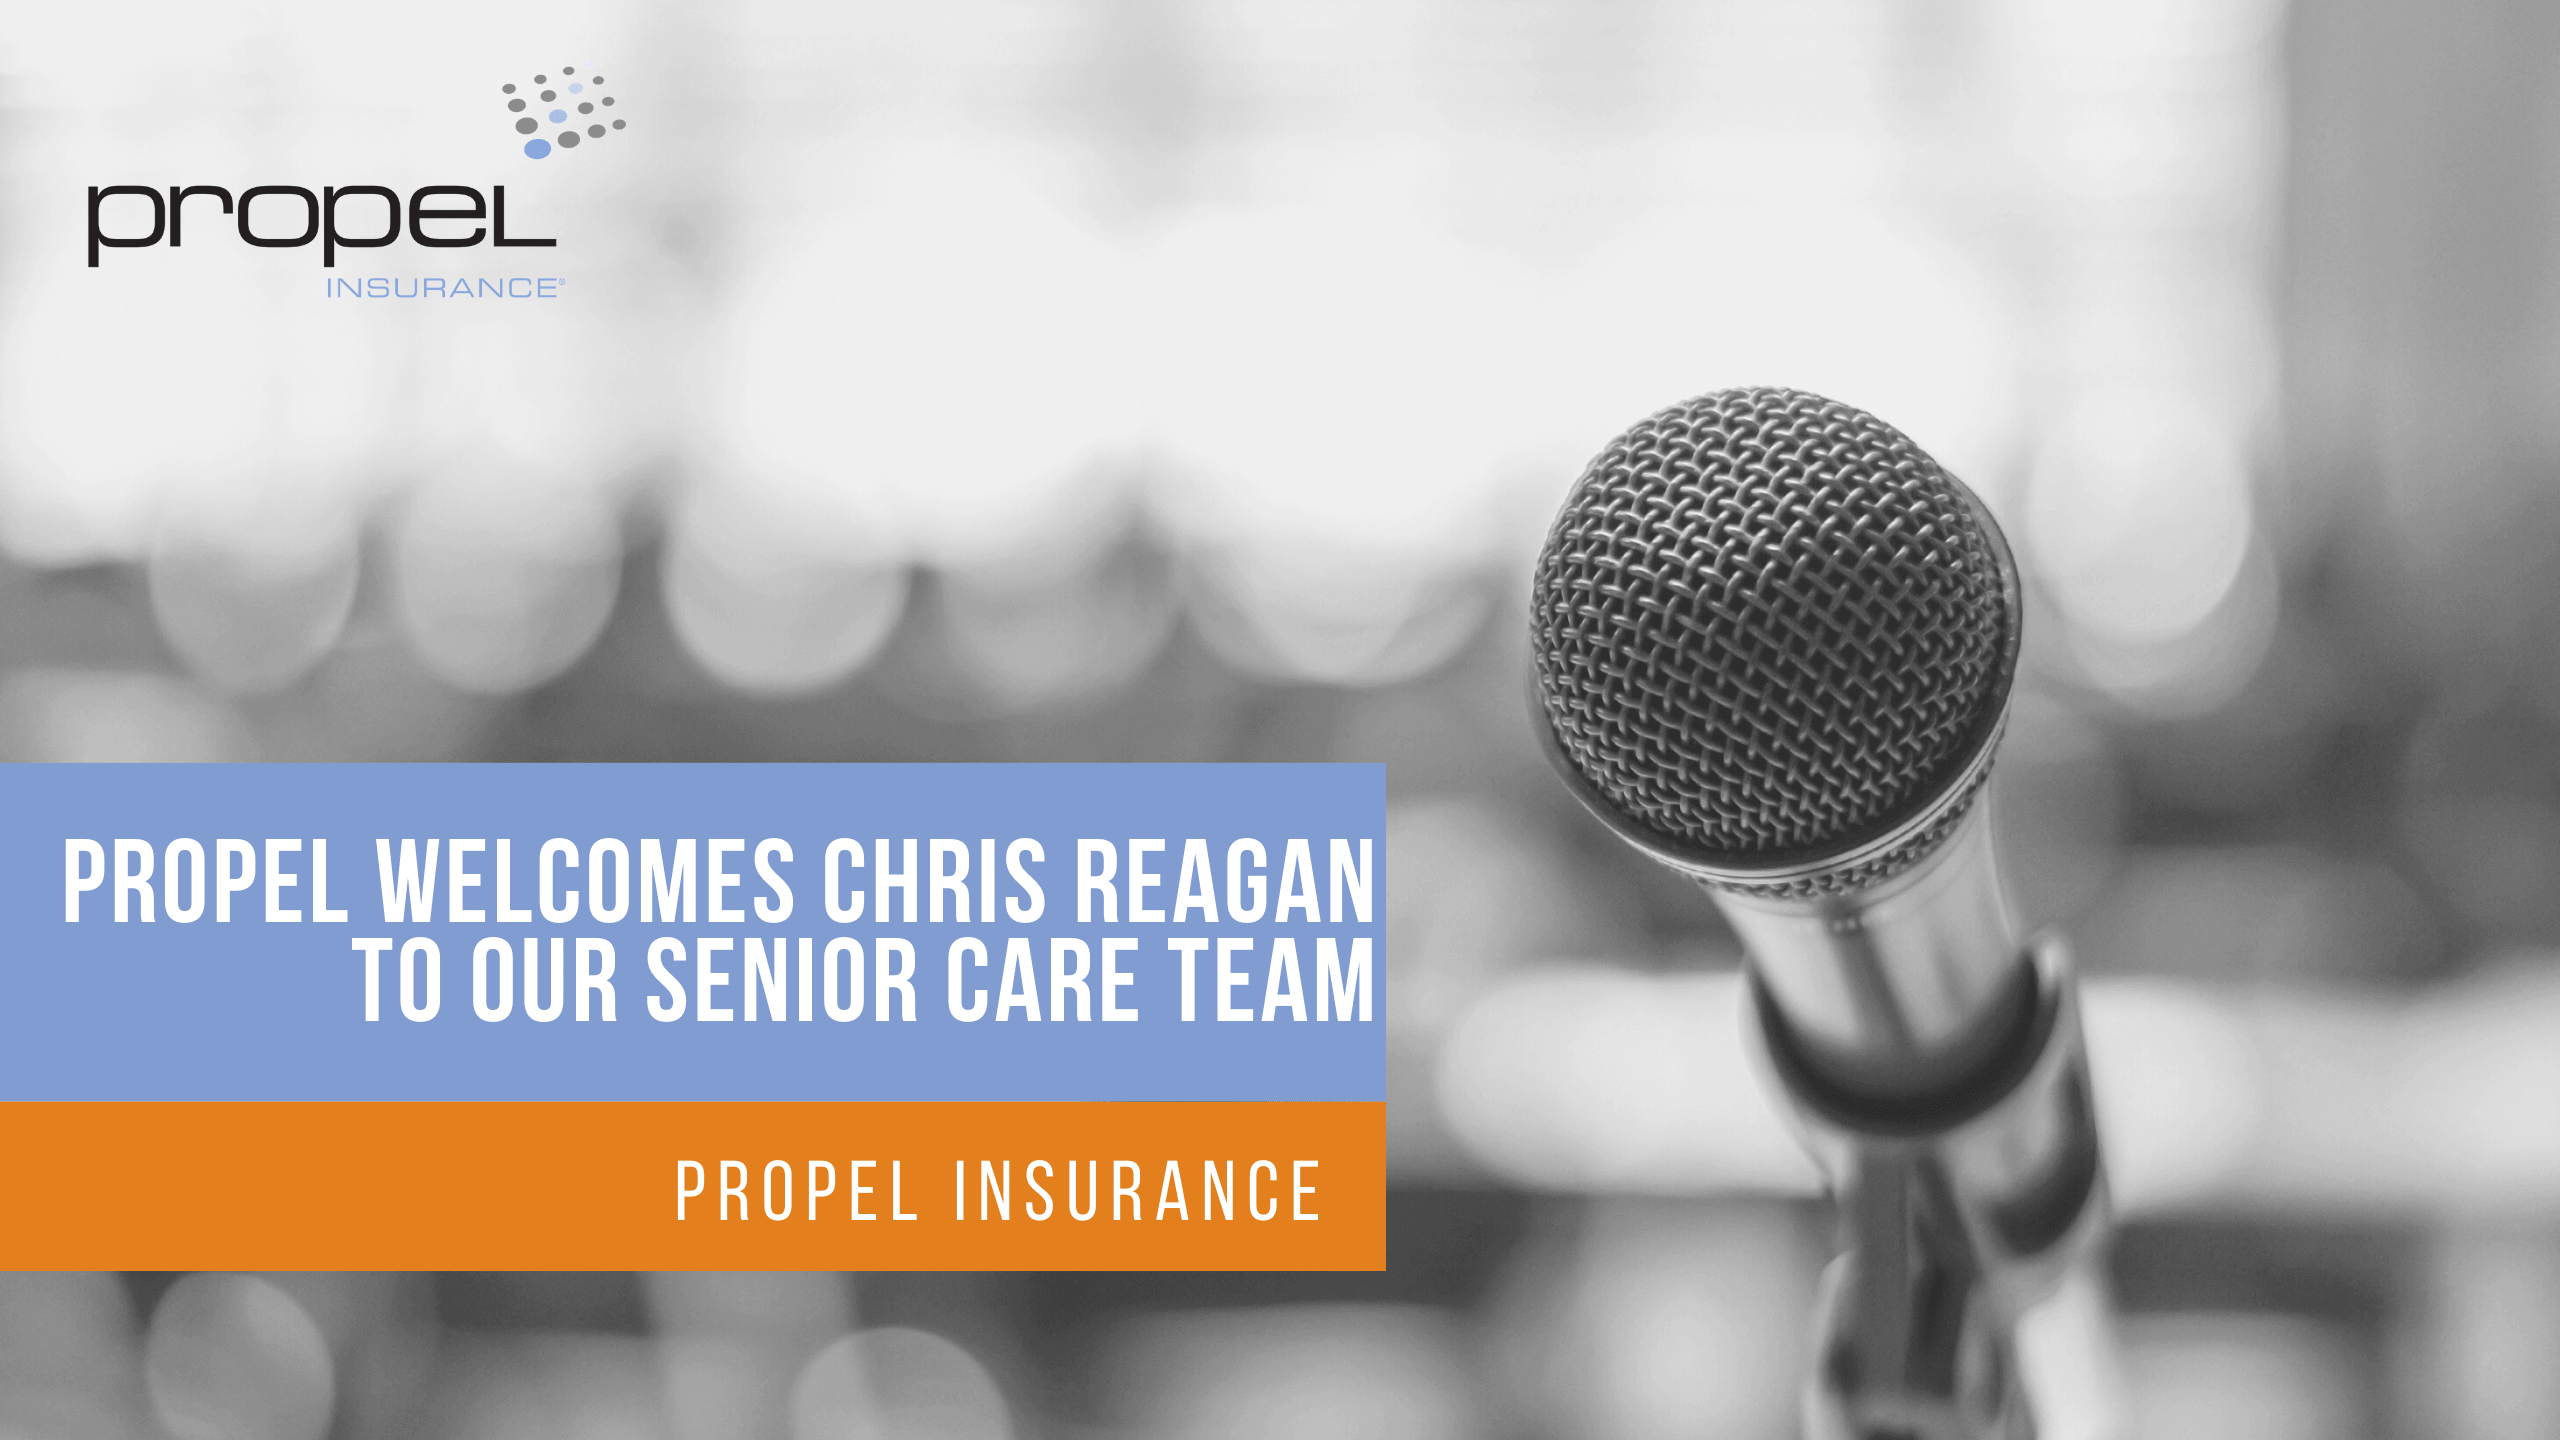 Propel Welcomes Chris Reagan to our Senior Care Team